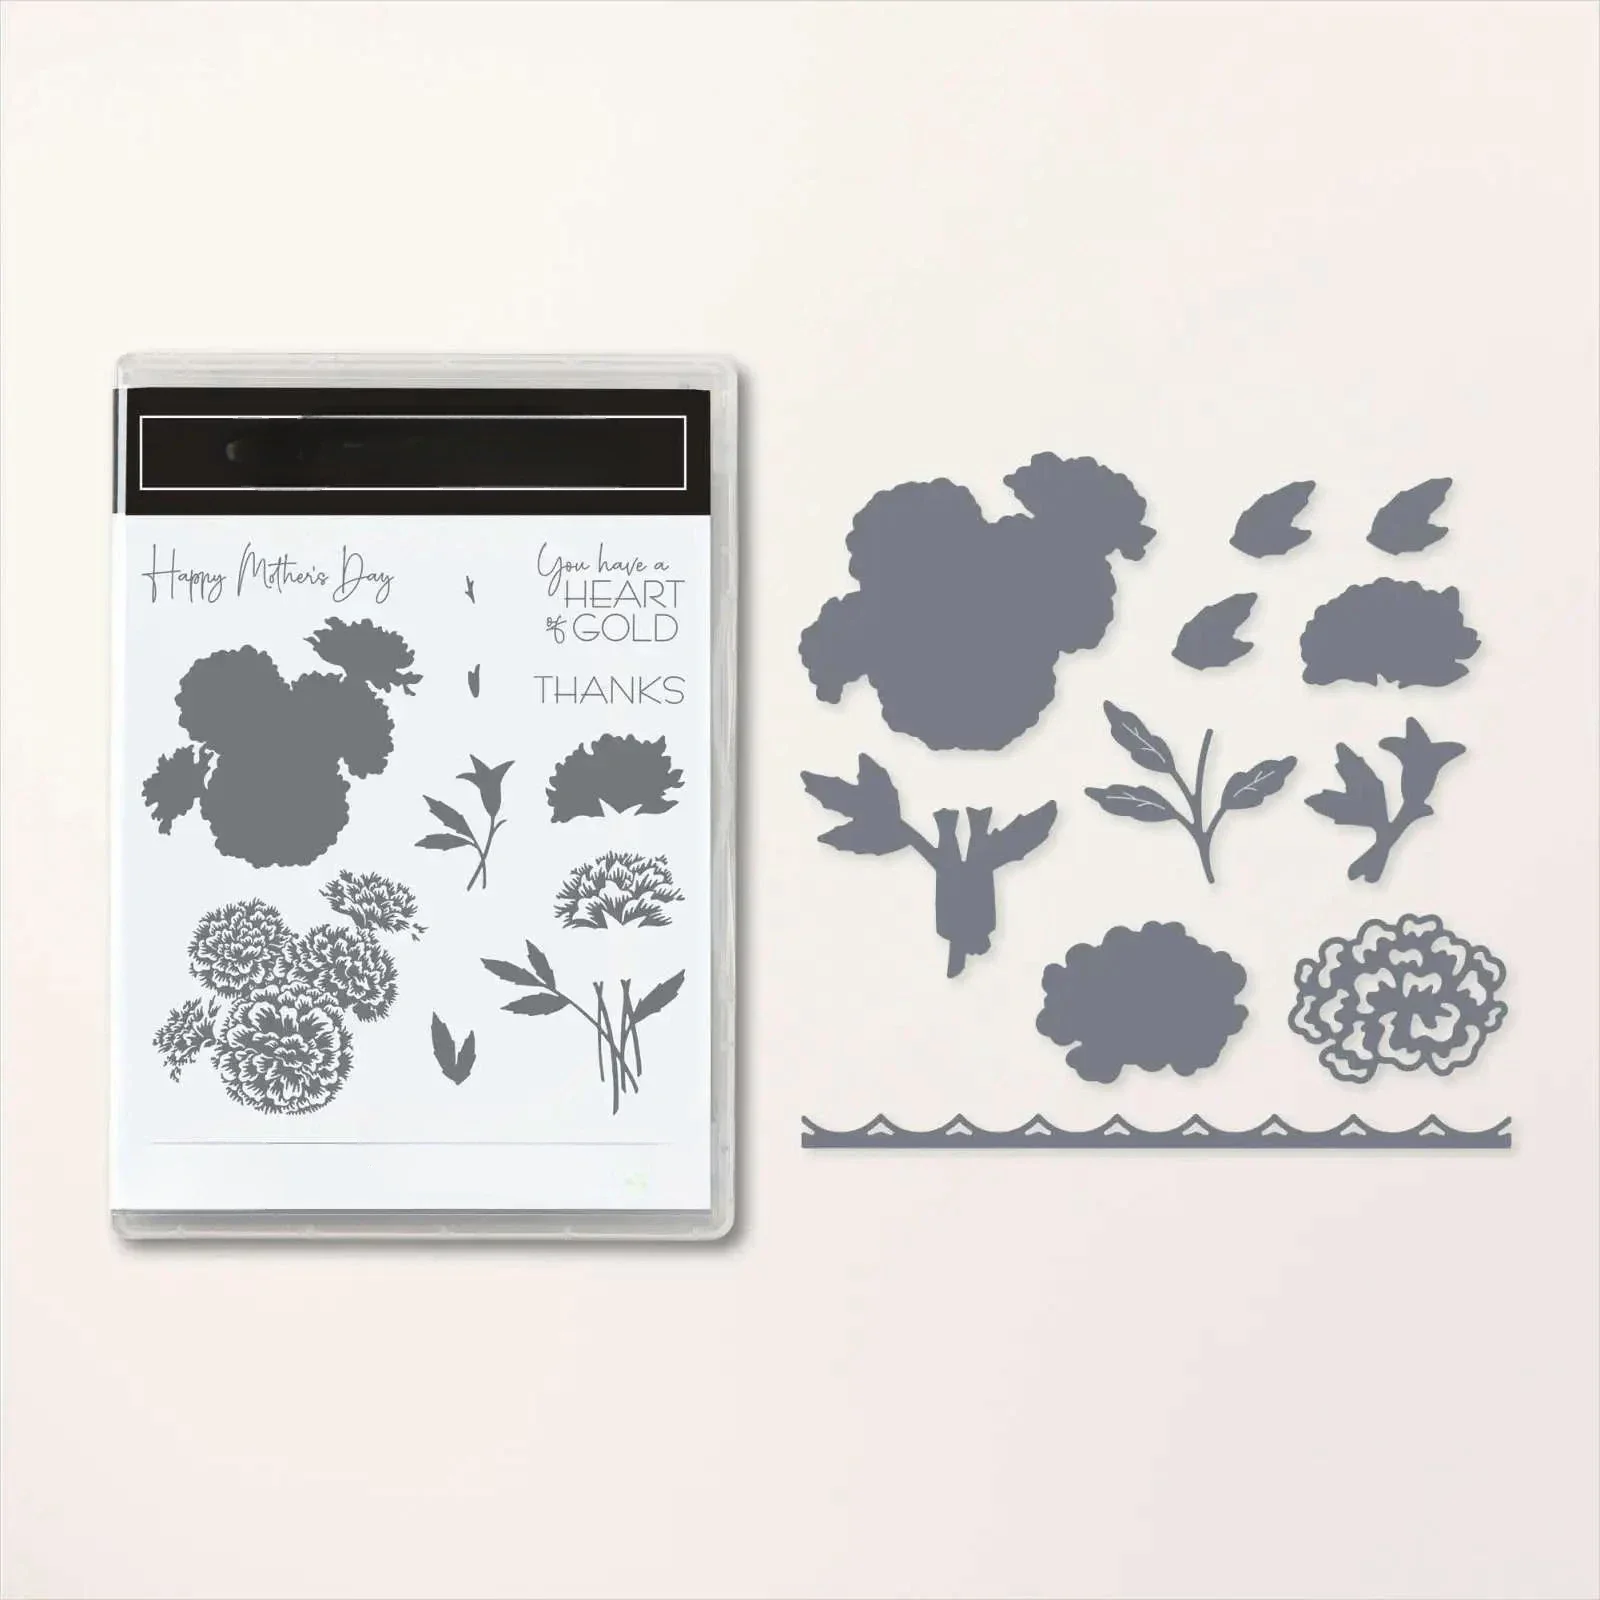 

New Marigold Moments Metal Cutting Dies Clear Stamp Scrapbook Diary Decoration Embossing Template DIY Make Card Album